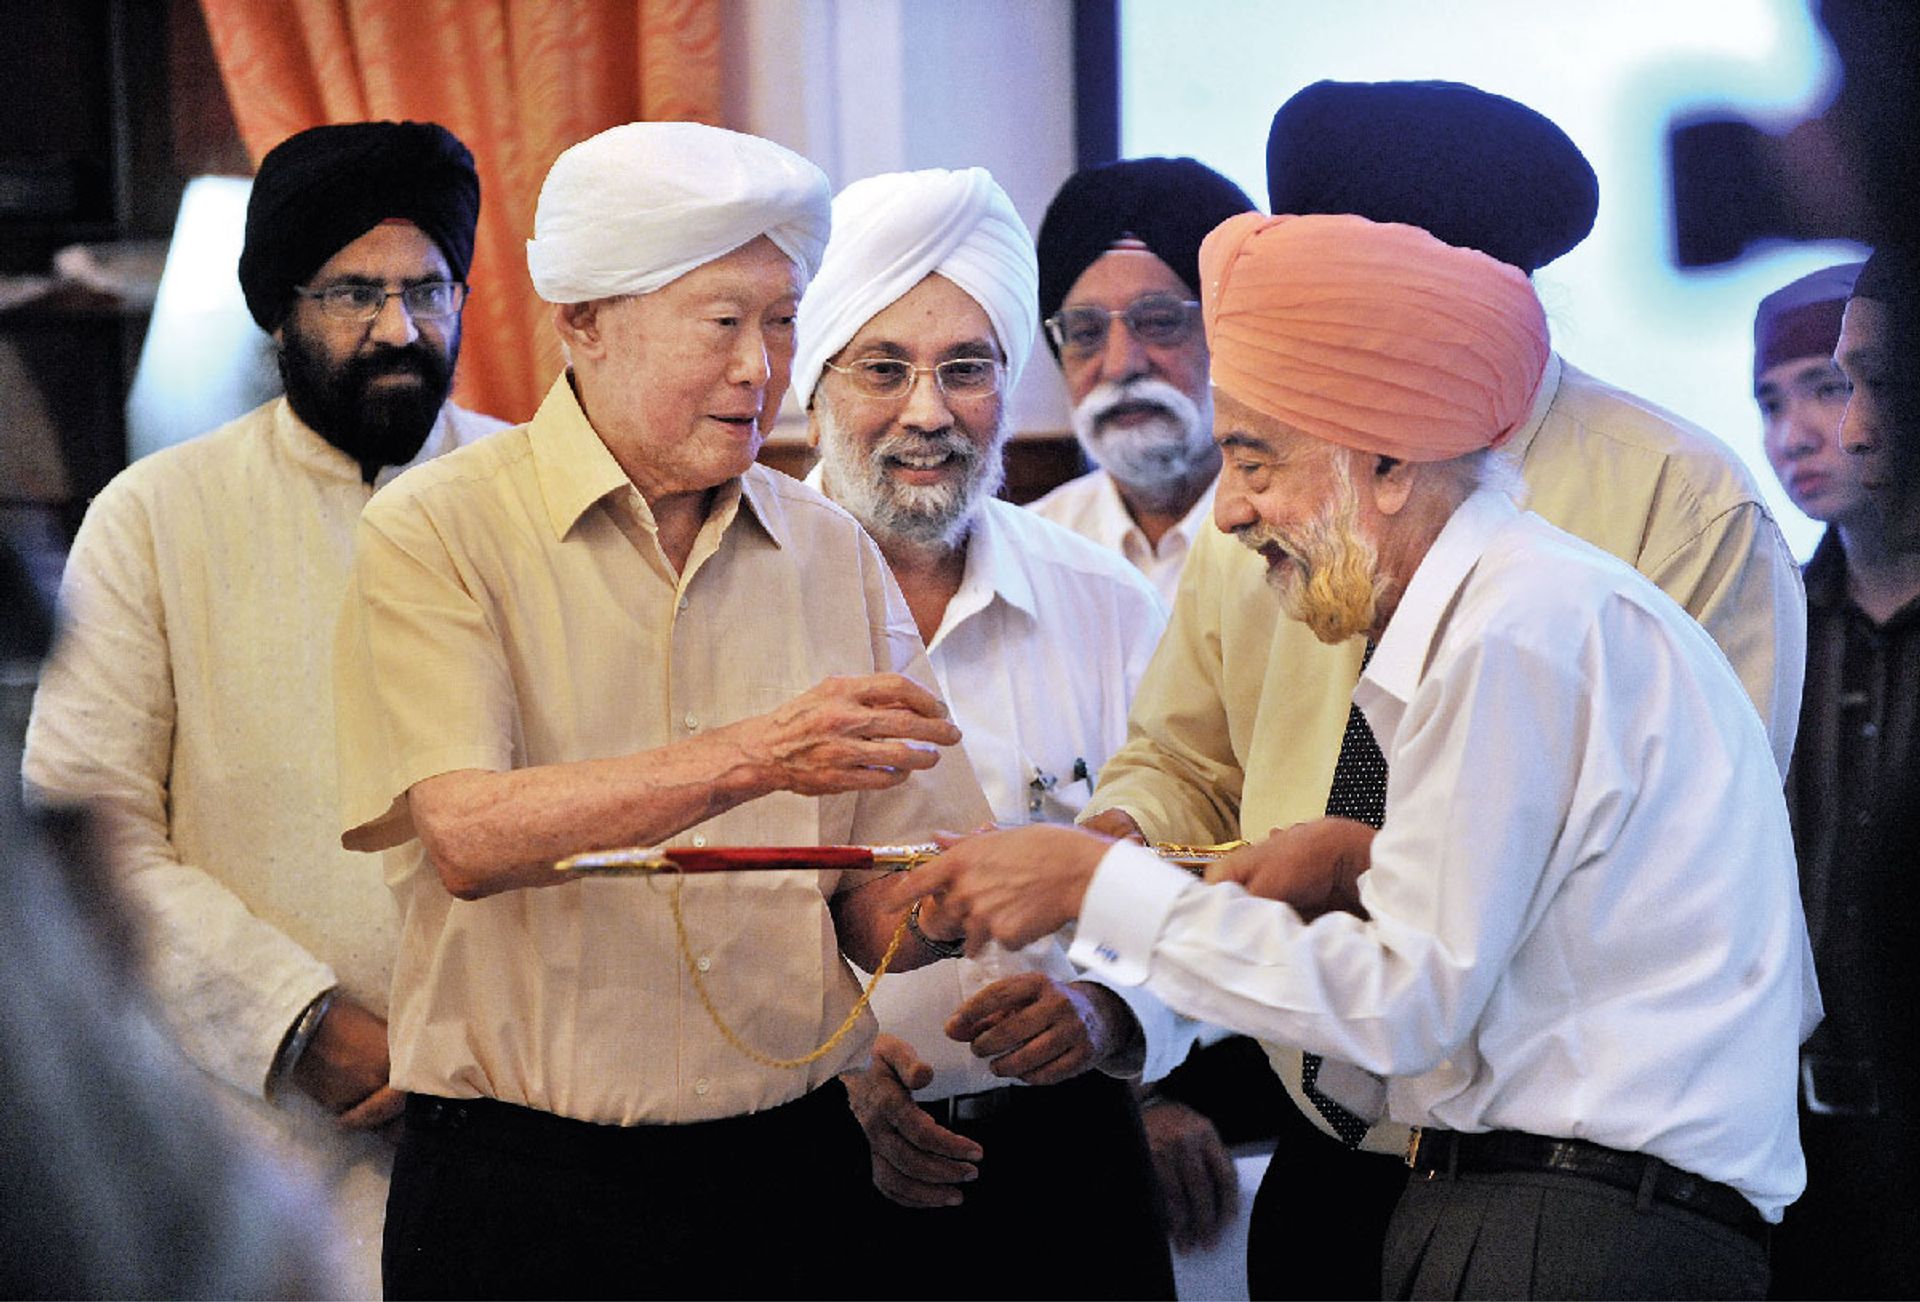 Mr Lee receiving a ceremonial sword symbolising respect, or a kirpan, from Sikh businessman Kartar Singh Thakral at Bhai Maharaj Singh Memorial Temple on July 3, 2010. Keenly aware of the volatile nature of racial and religious issues, Mr Lee made an effort to reach out to different communities. ST Photo: Ng Sor Luan